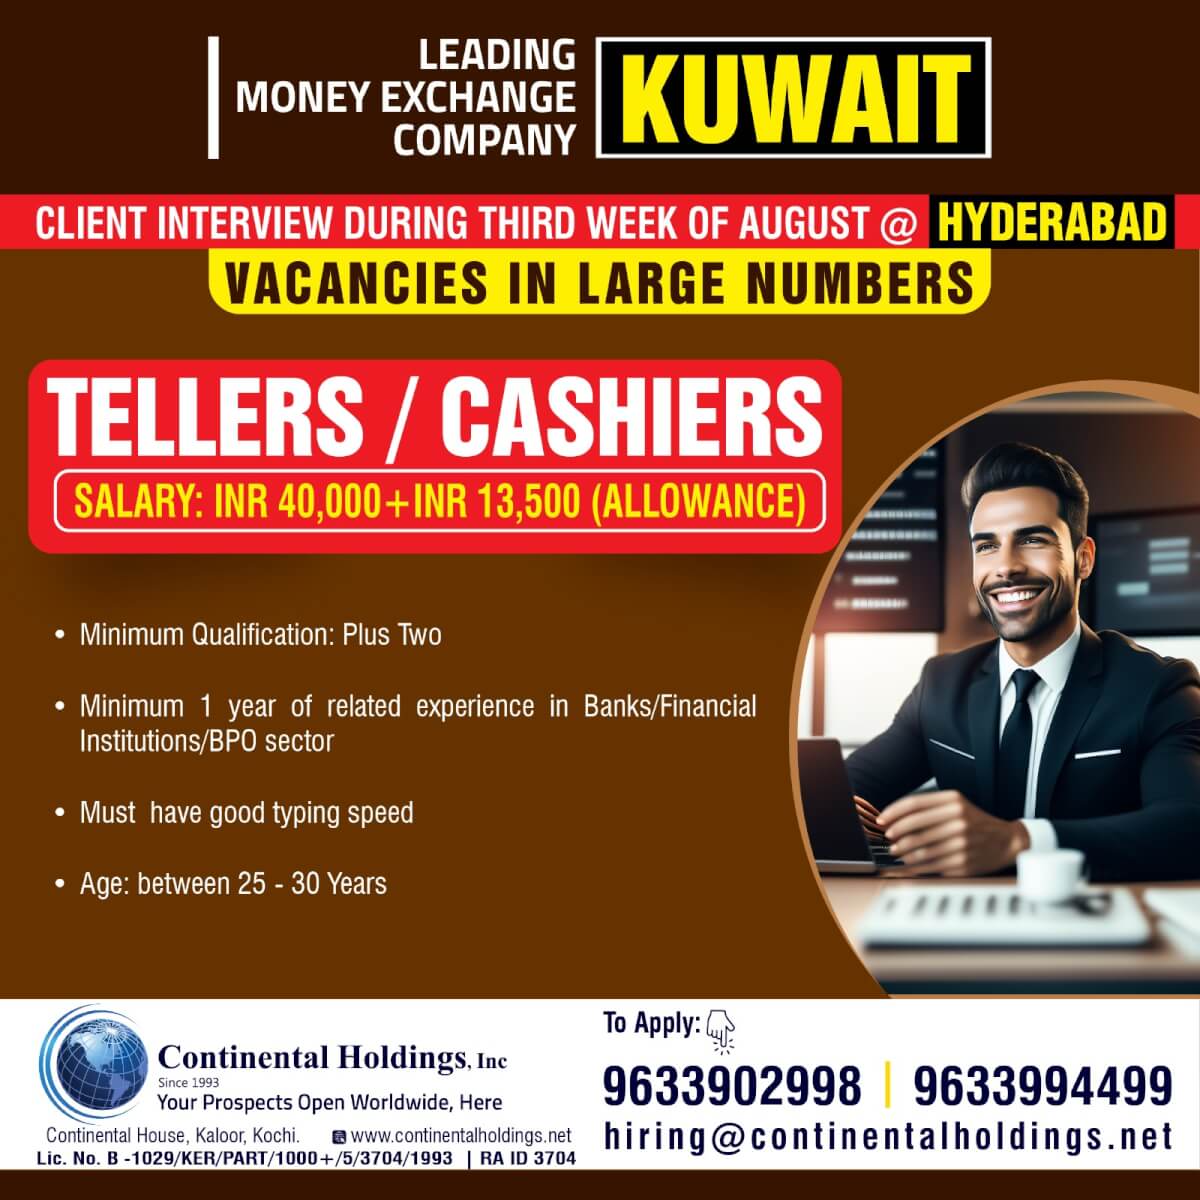 Hiring for Kuwait - Client Interview at Hyderabad